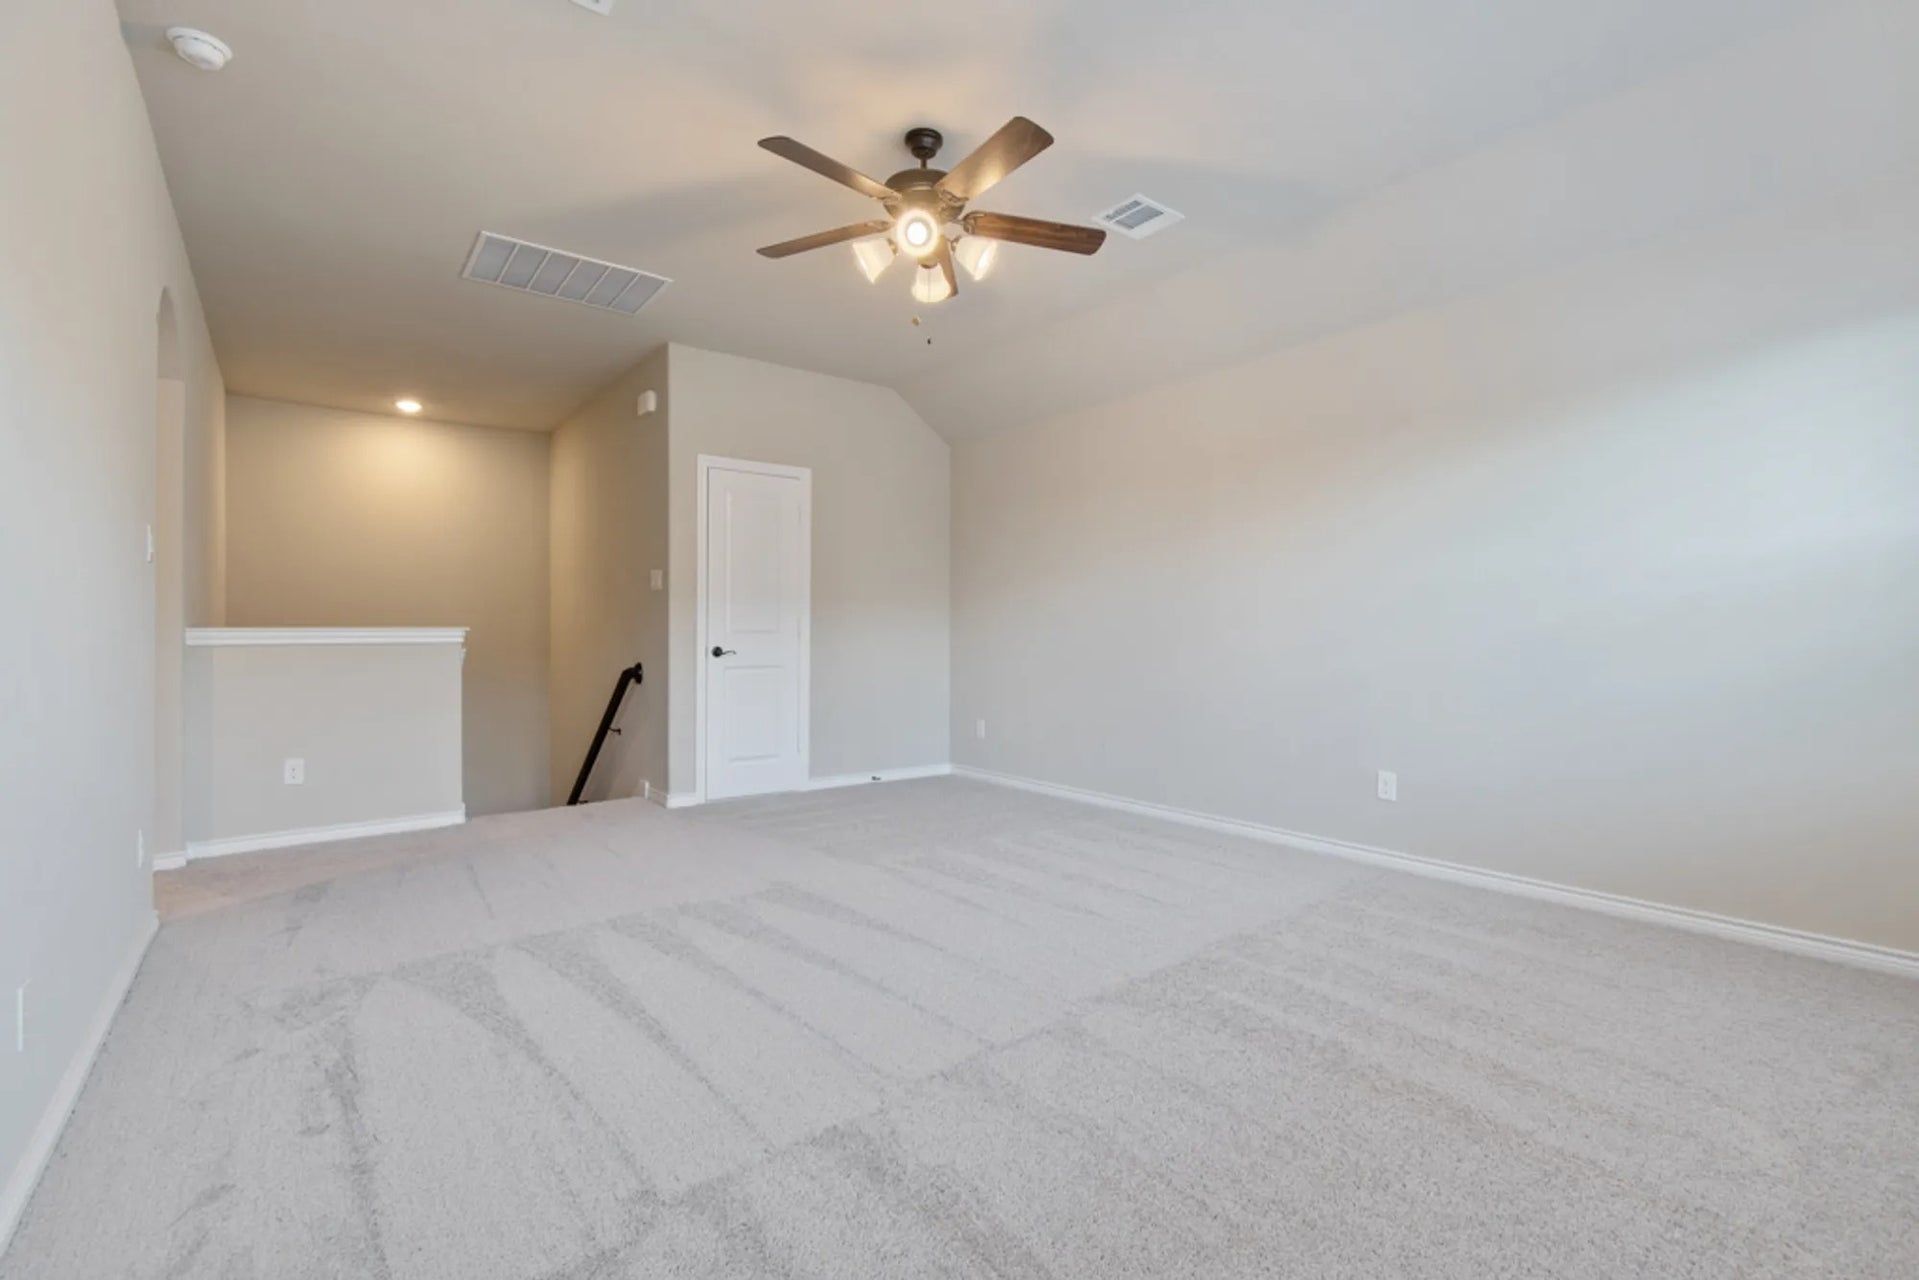 4br New Home in Joshua, TX